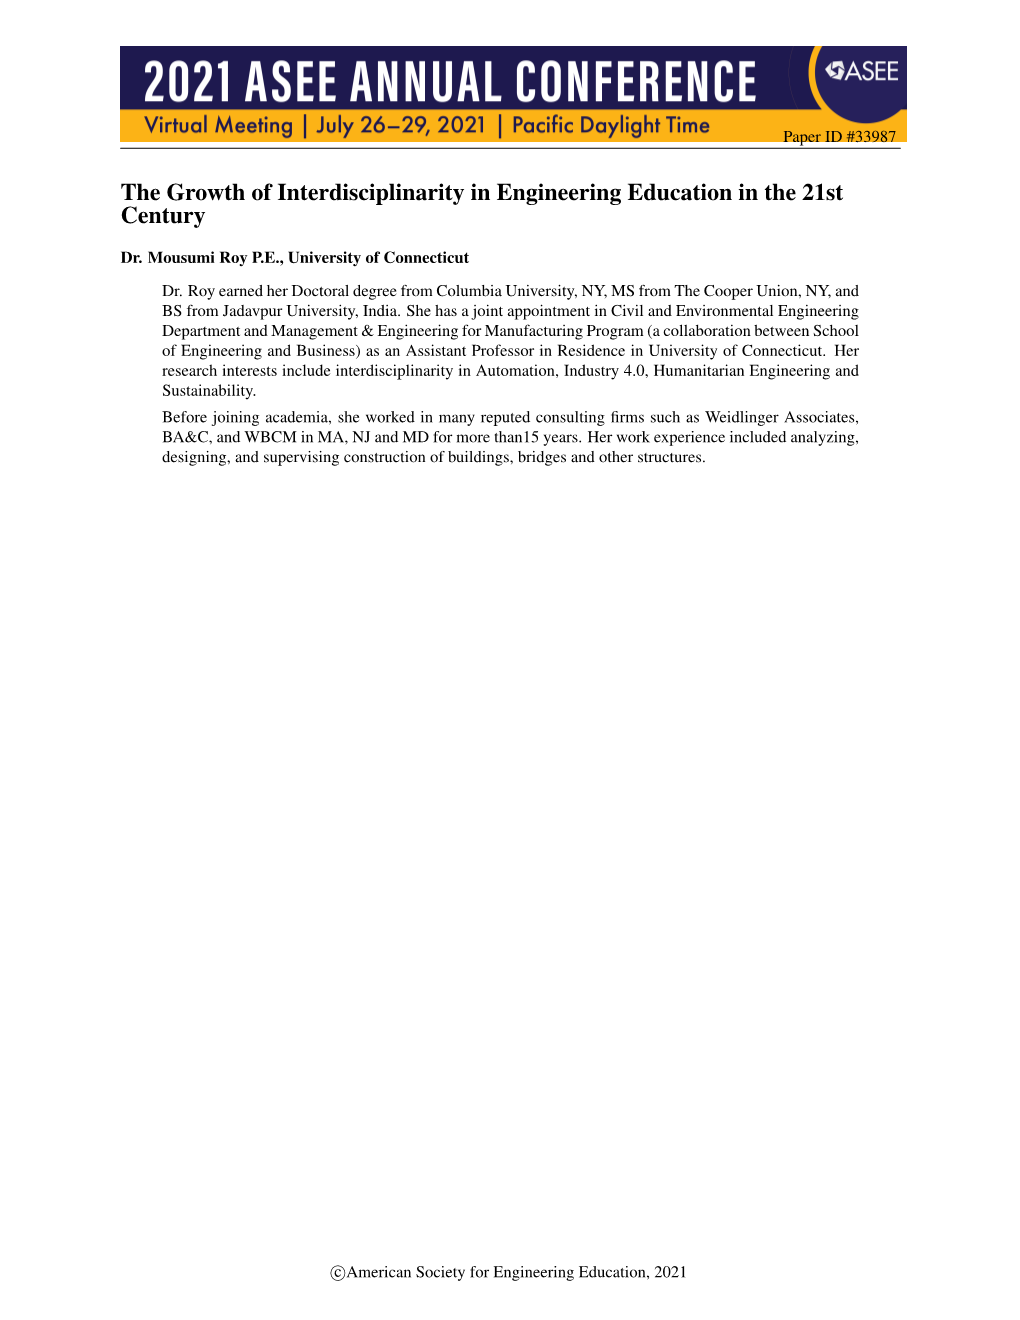 The Growth of Interdisciplinarity in Engineering Education in the 21St Century